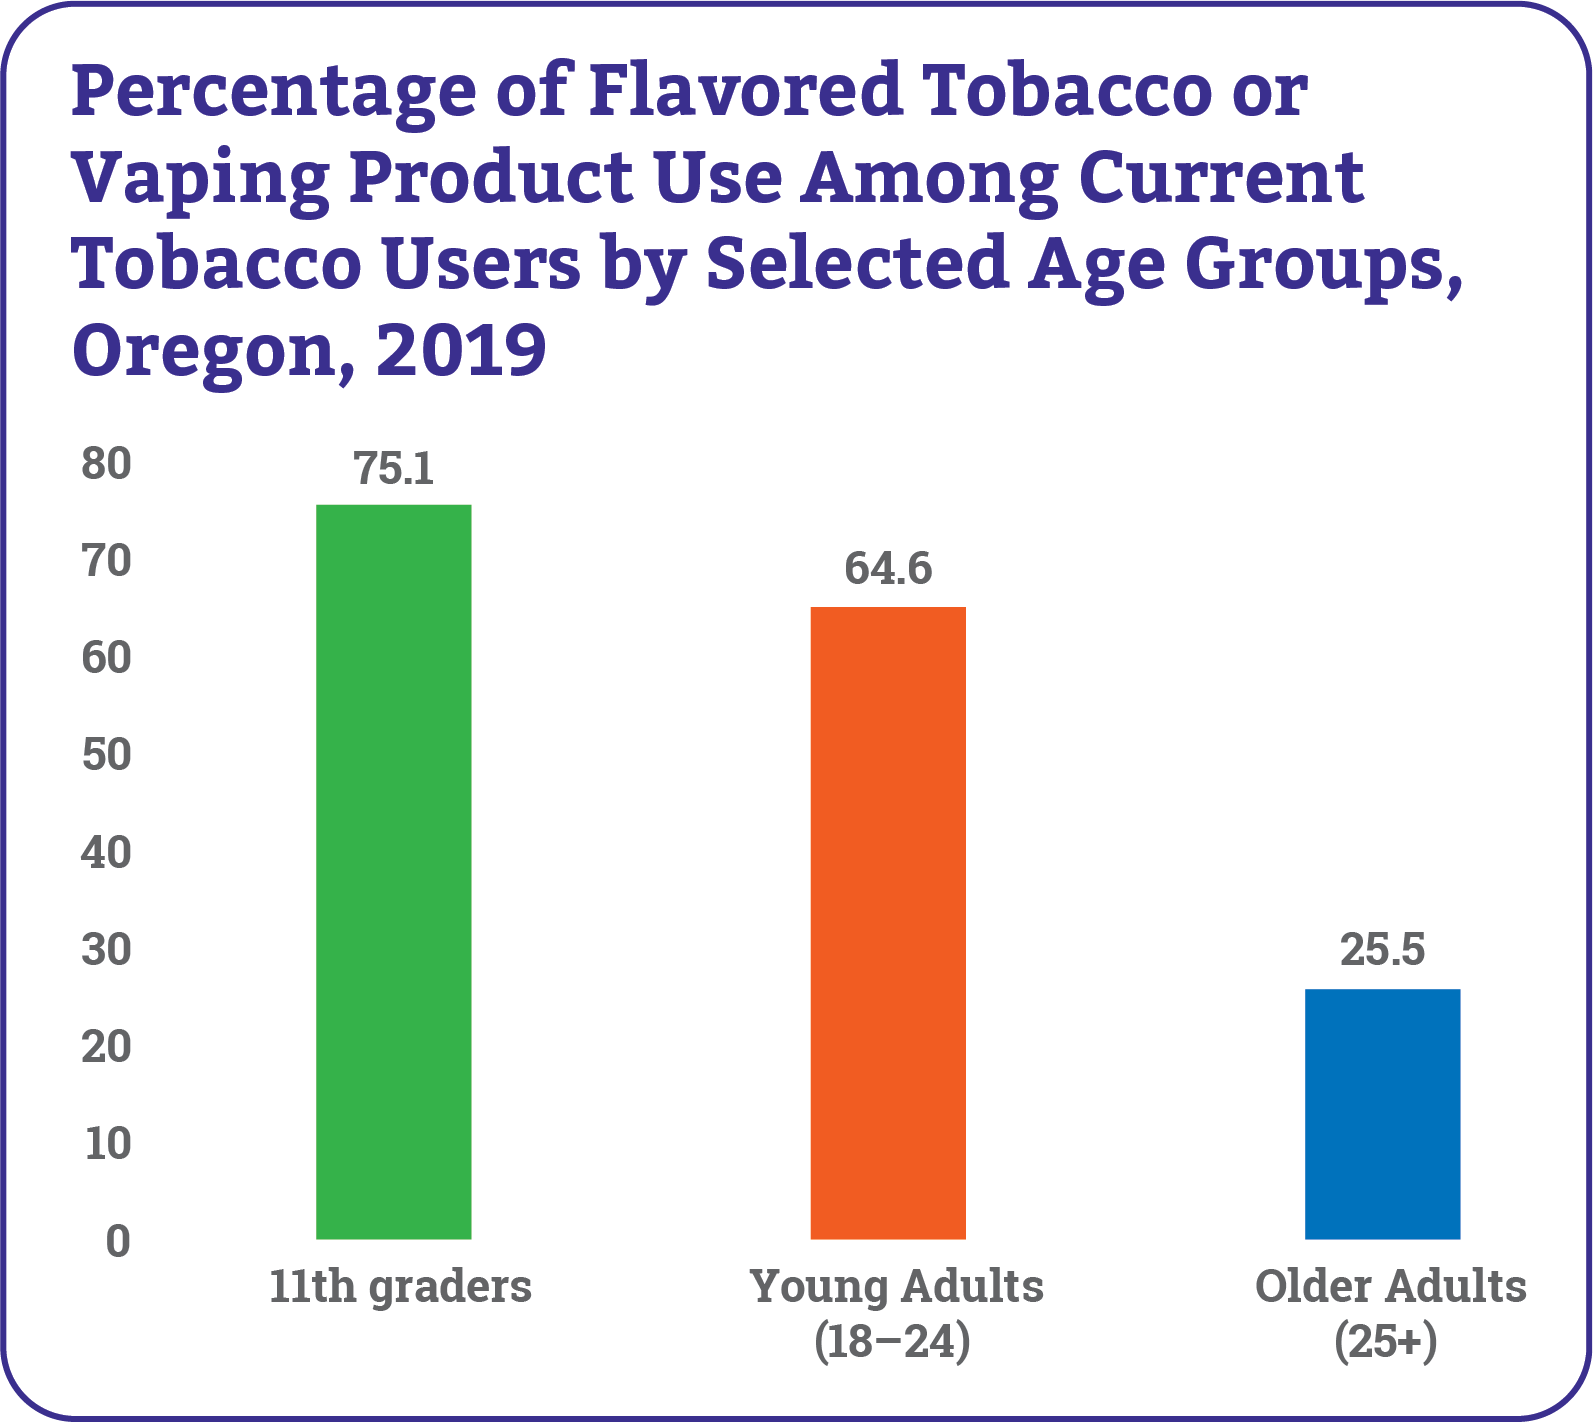 In Oregon, 75% of 11th graders who use tobacco products report that they use flavored products. Compare that with just 25% of adults over the age of 25 and it becomes clear that flavored tobacco has a clear target demographic